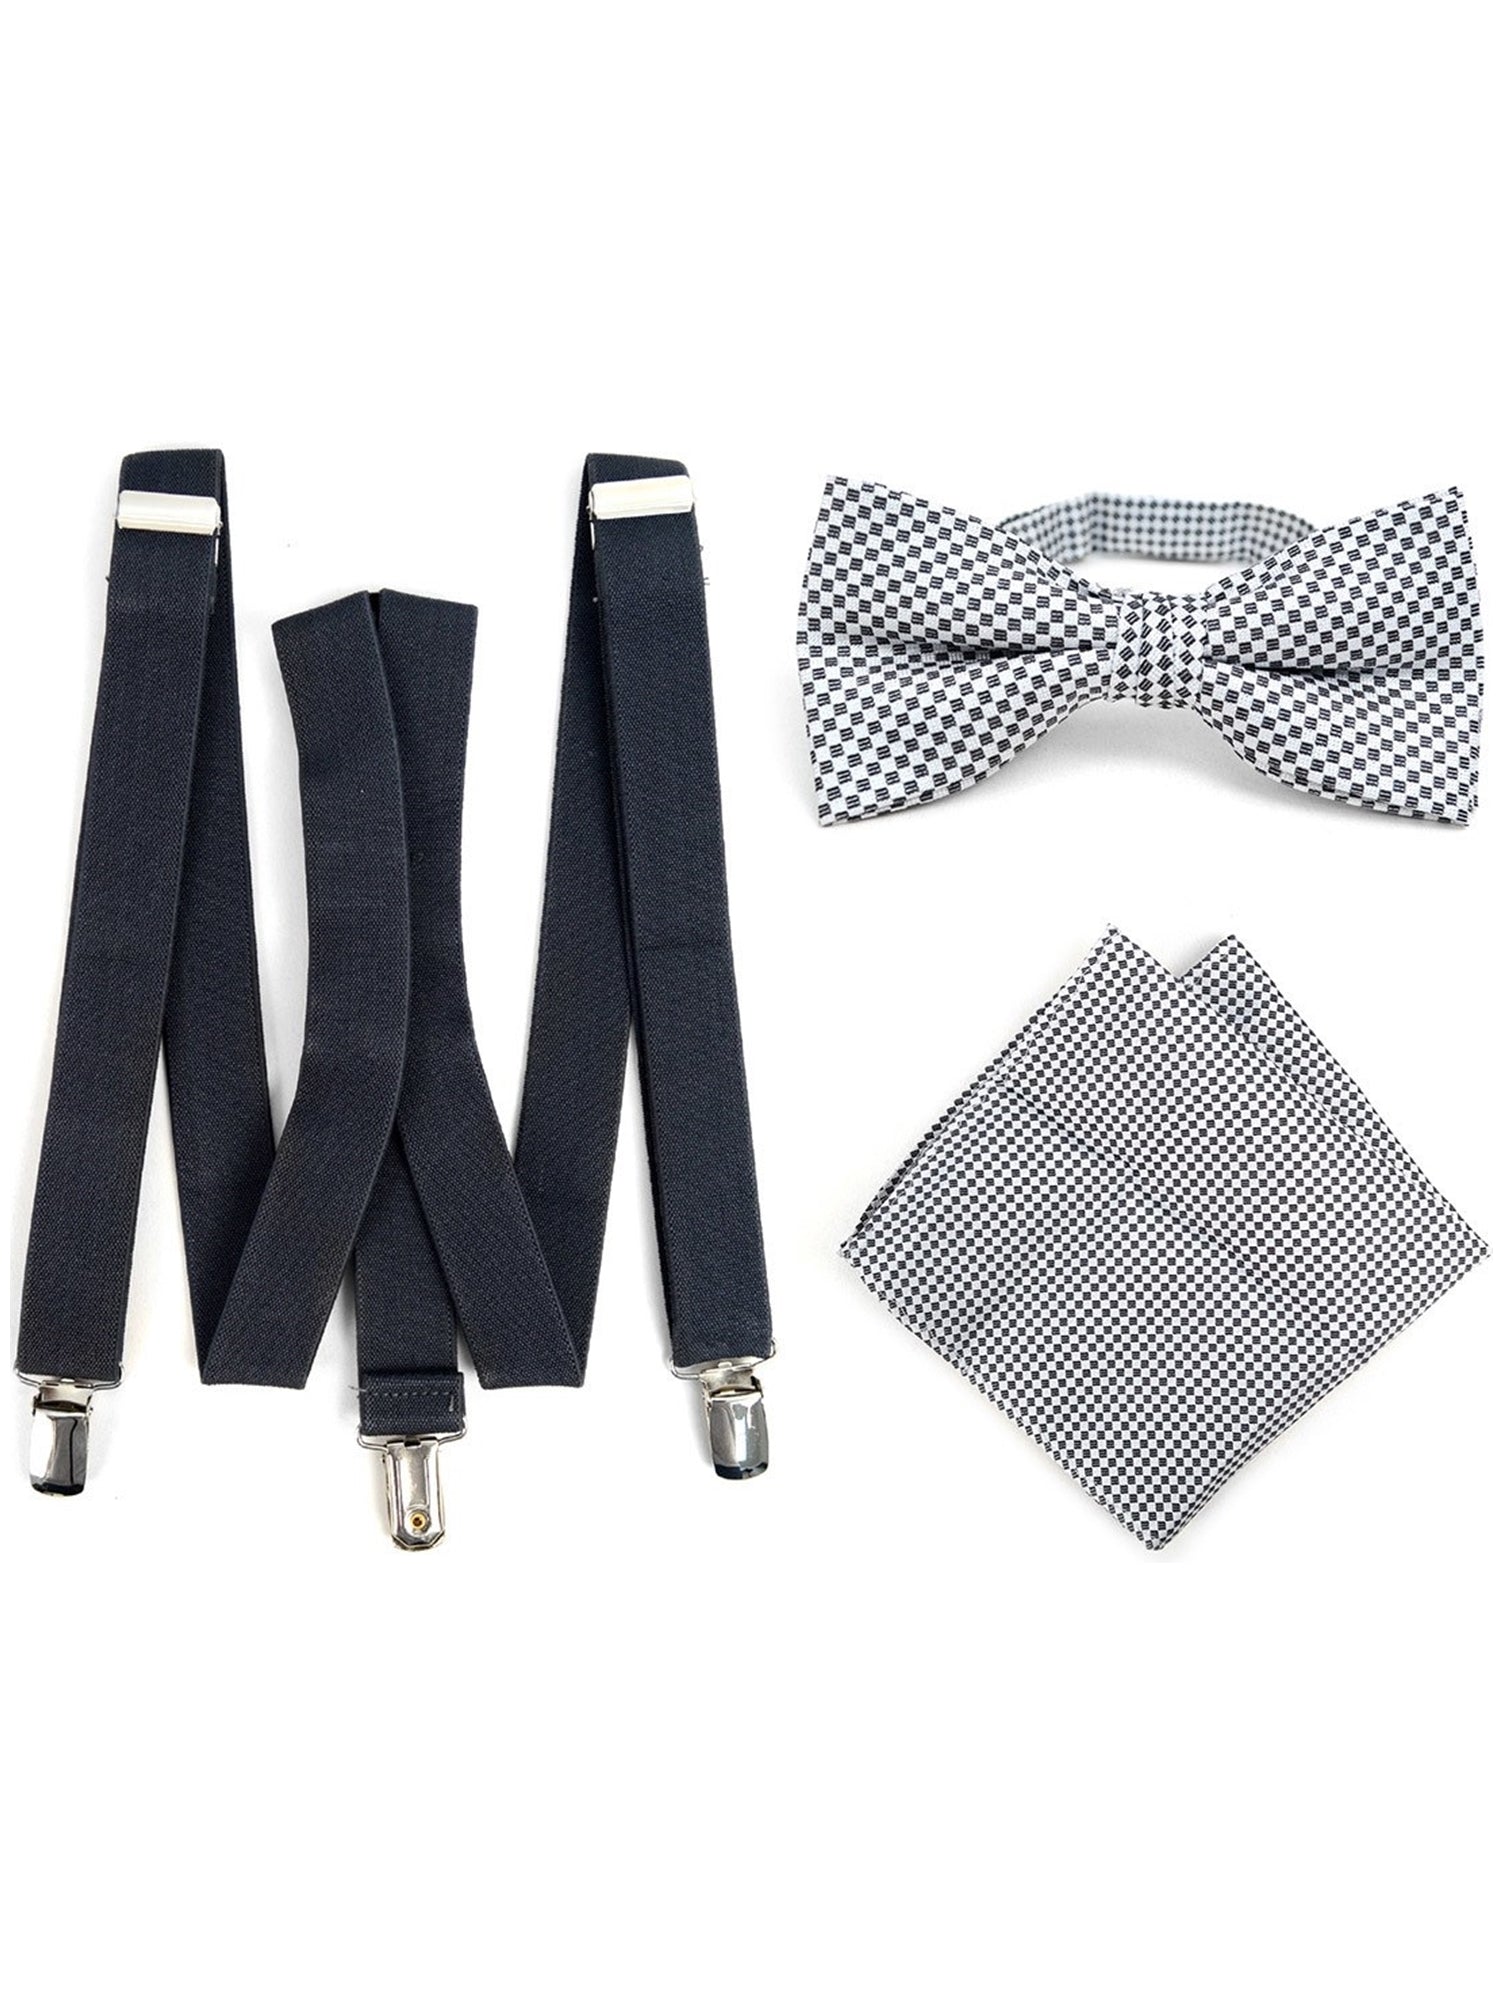 Men's Charcoal 3 PC Clip-on Suspenders, Bow Tie & Hanky Sets Men's Solid Color Bow Tie TheDapperTie Charcoal # 3 Regular 